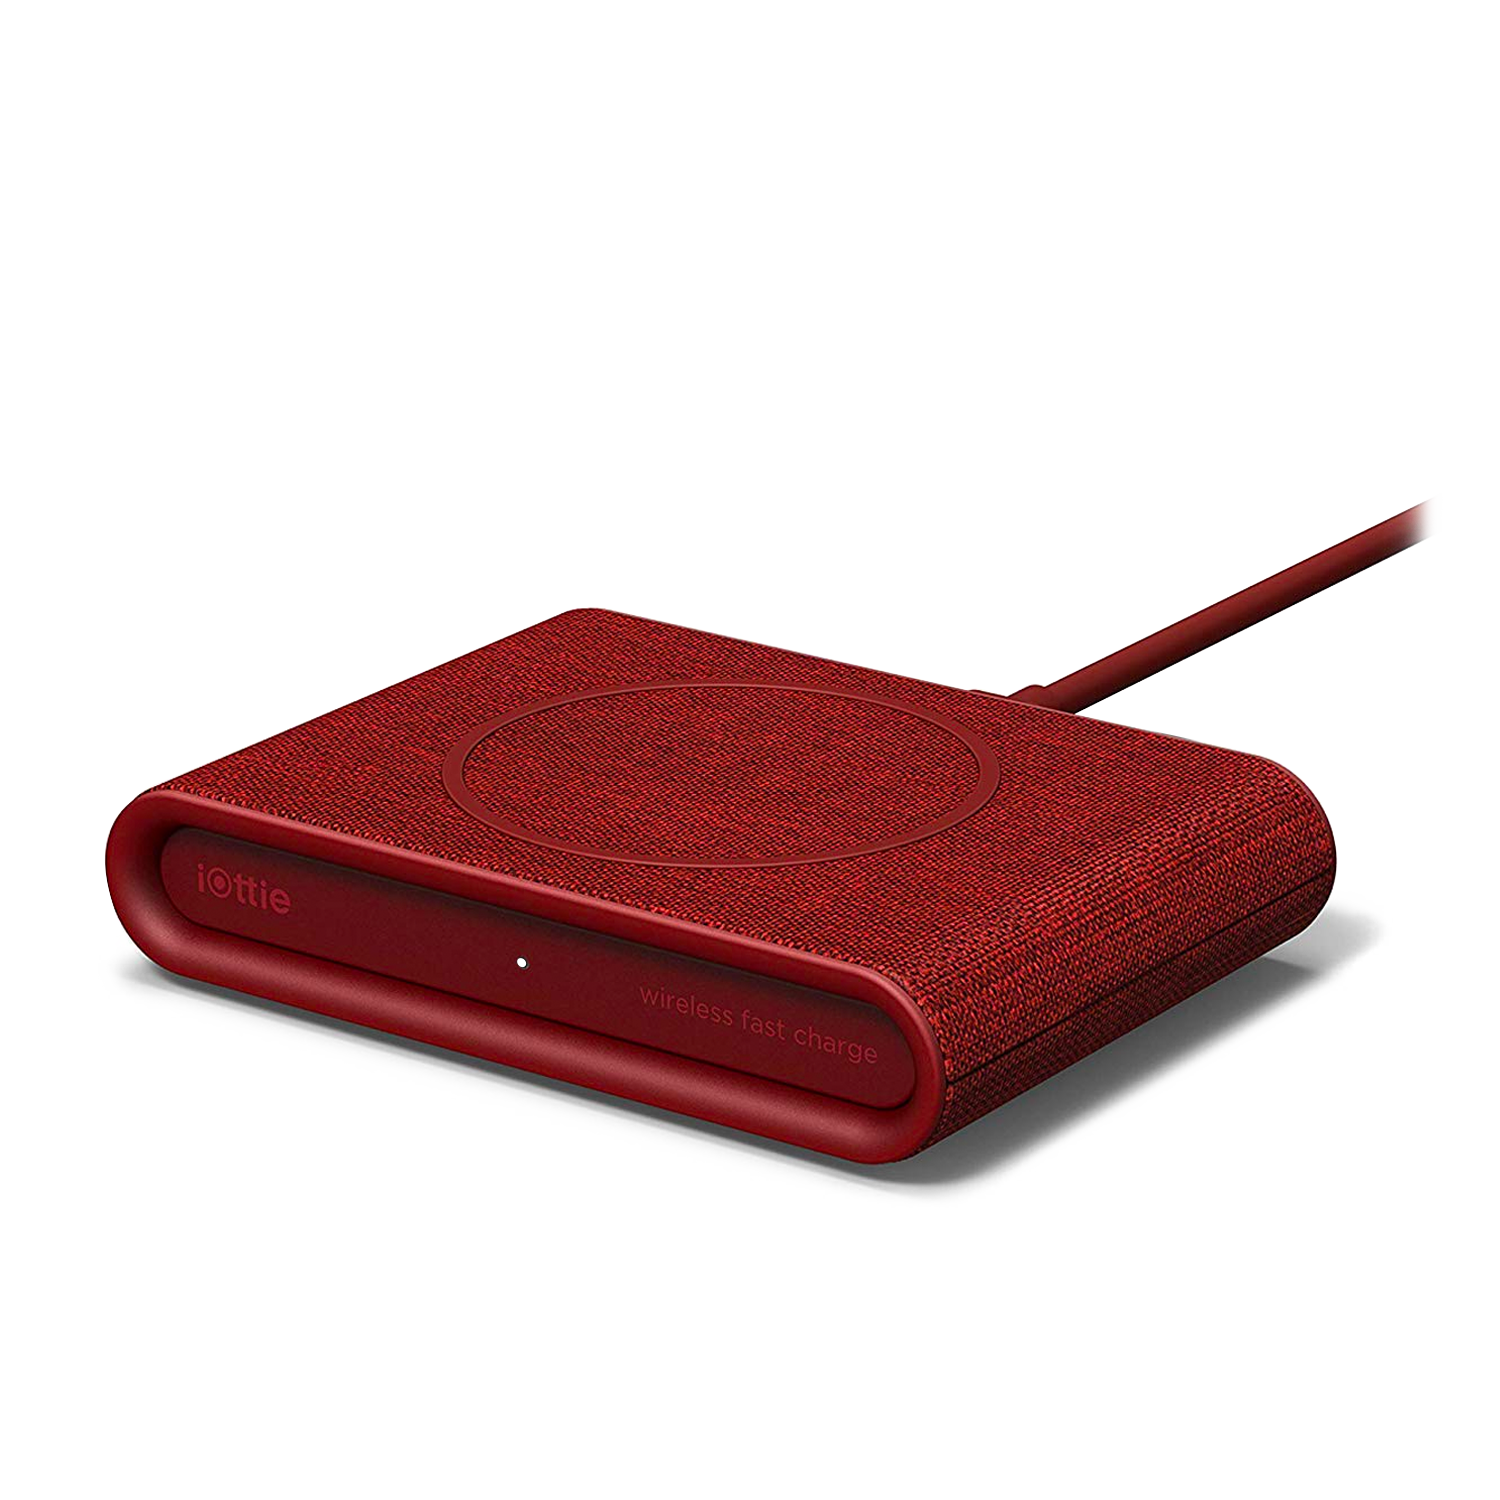 iON Wireless Mini Charging Pad in Ruby